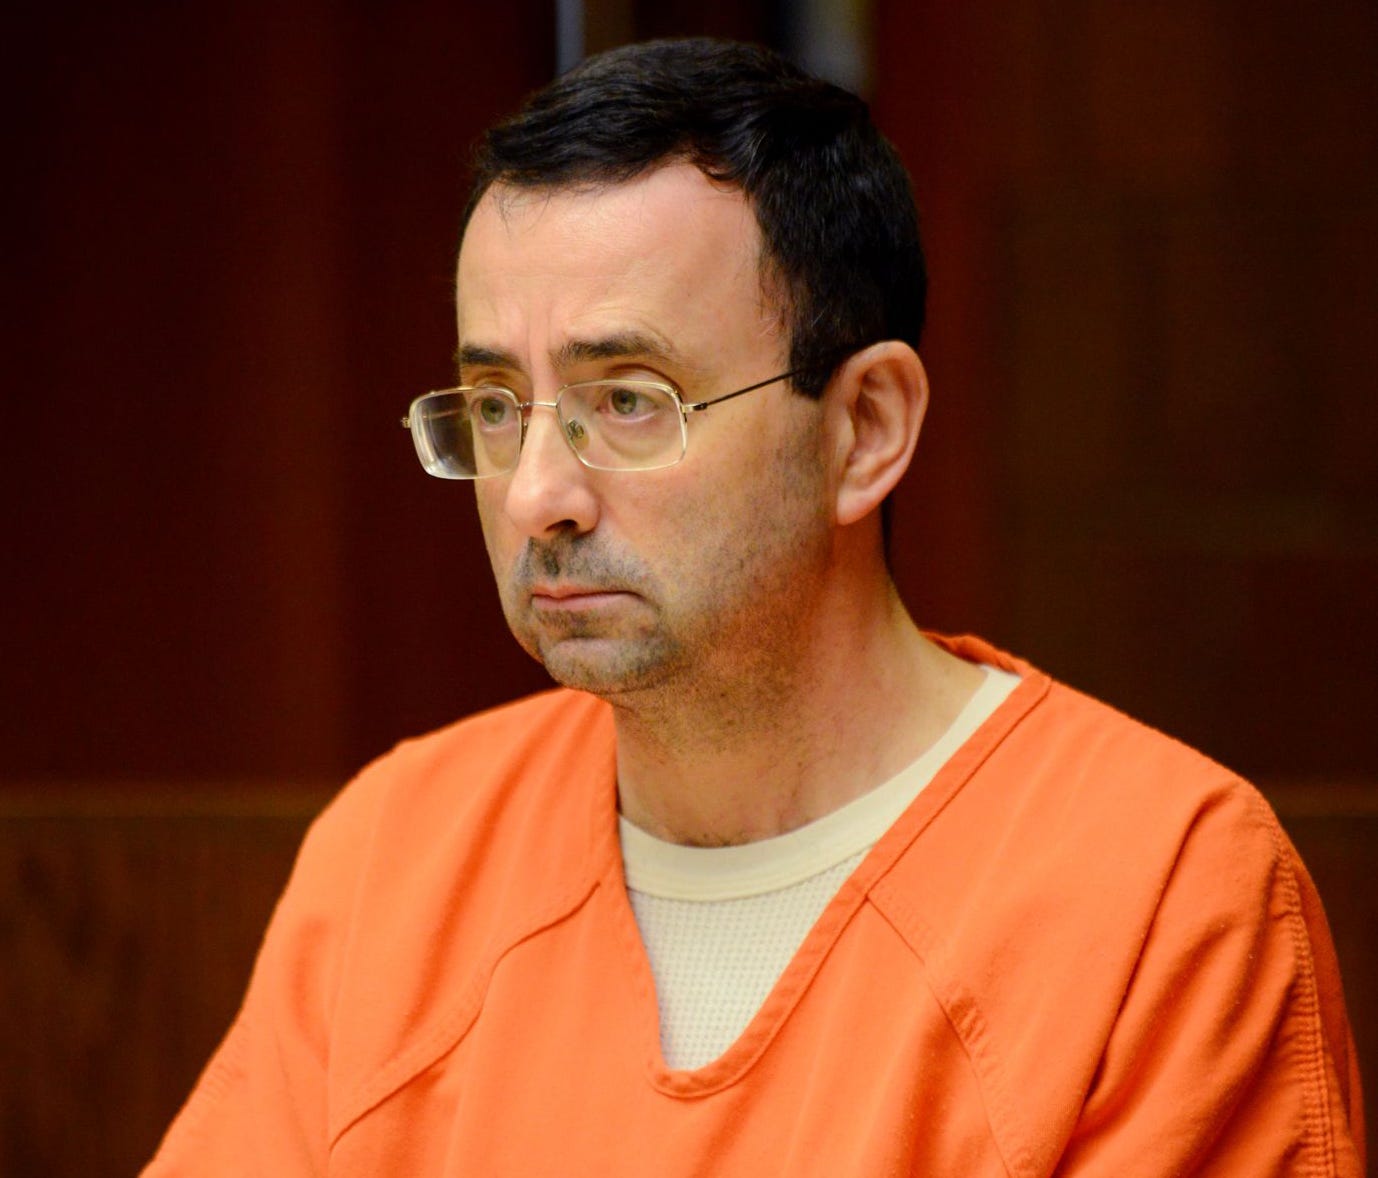 Larry Nassar, the former USA Gymnastics and Michigan State University doctor, listens during the second portion of his preliminary hearing on sexual assault charges Friday, May 26, 2017, at the 55th District Court in Mason, Mich.